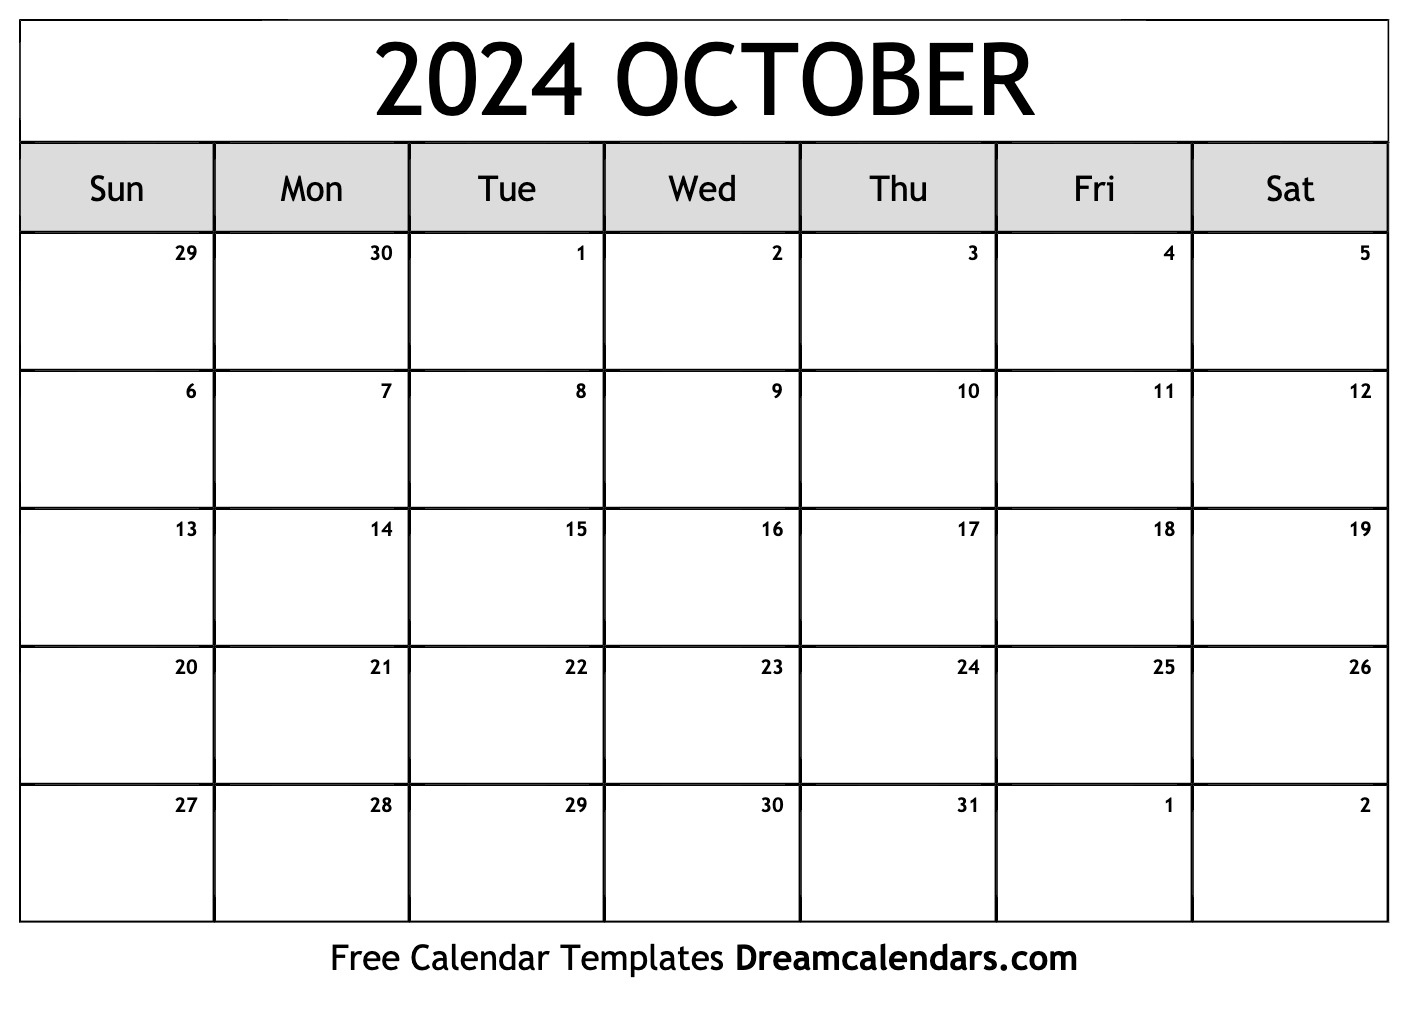 October 2024 Calendar | Free Blank Printable With Holidays | Free Printable Calendar October 2024